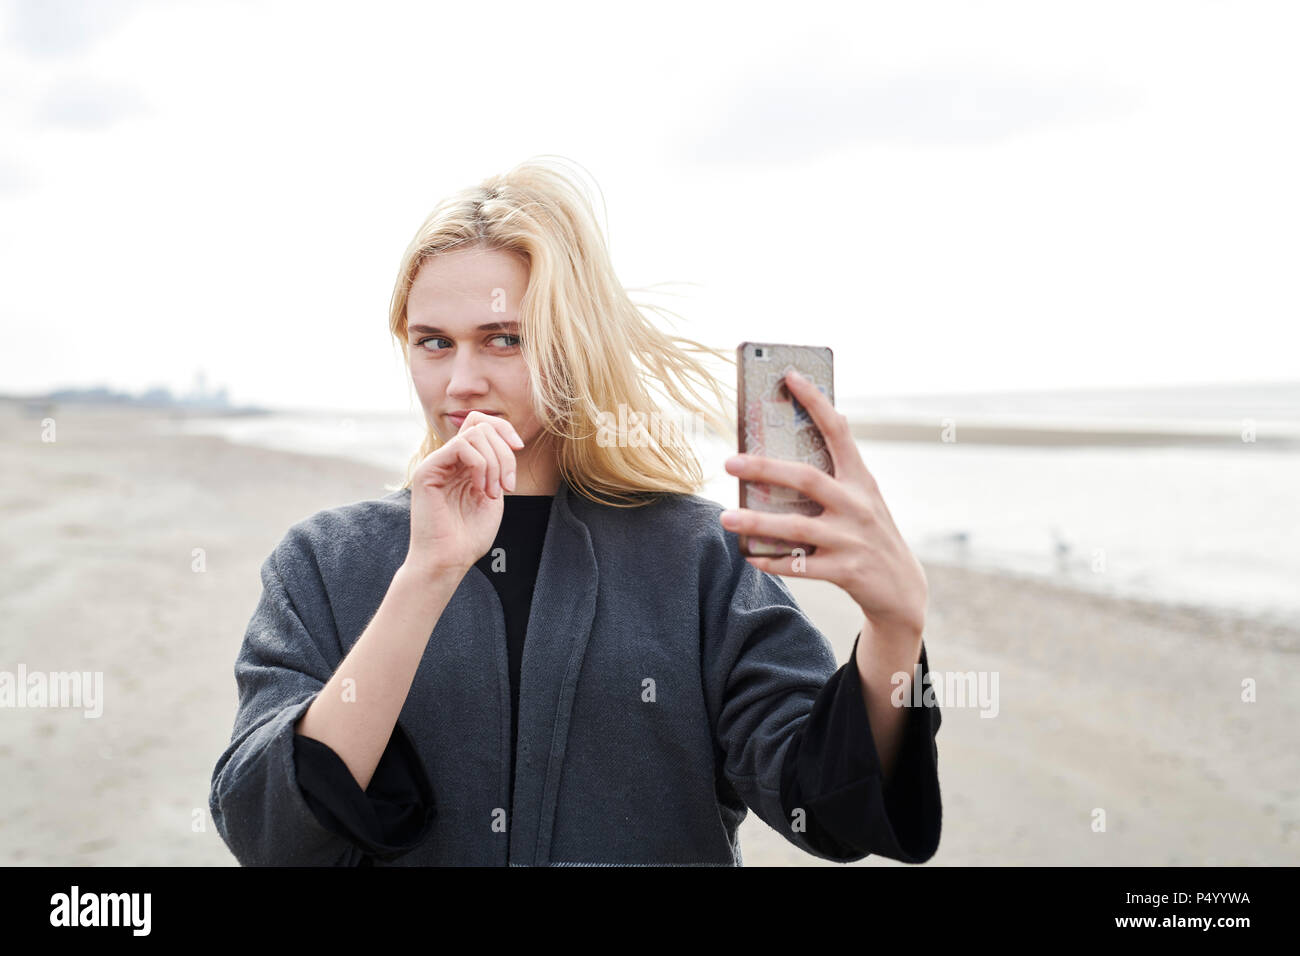 Netherlands, portrait of blond young woman taking selfie with smartphone on the beach Stock Photo